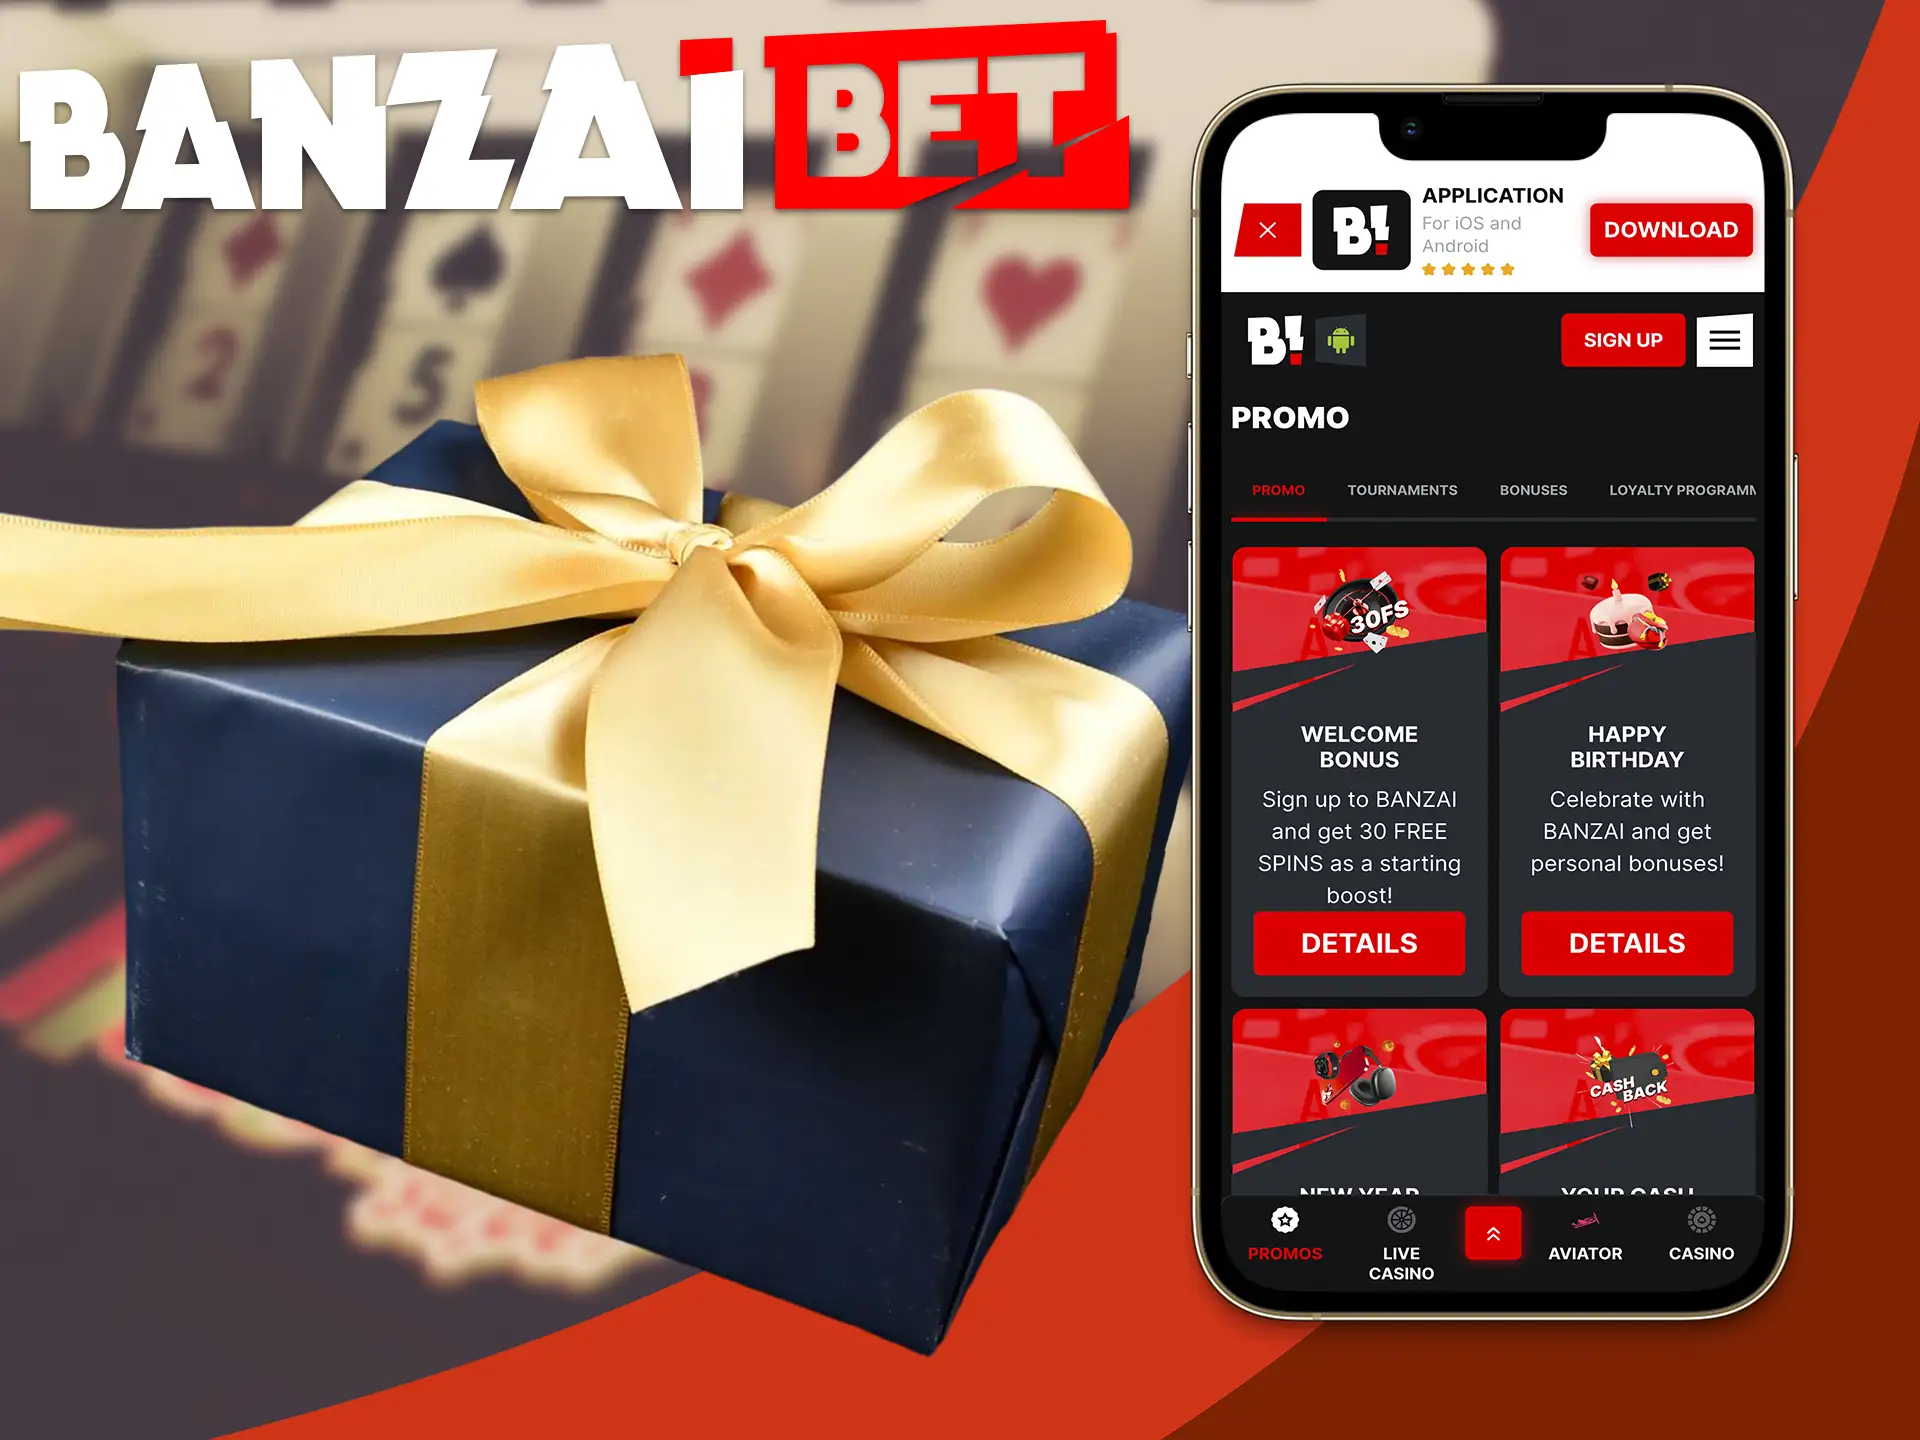 New users will receive a nice compliment from Banzai Bet for creating an account, it can be used in both casino and sports betting.